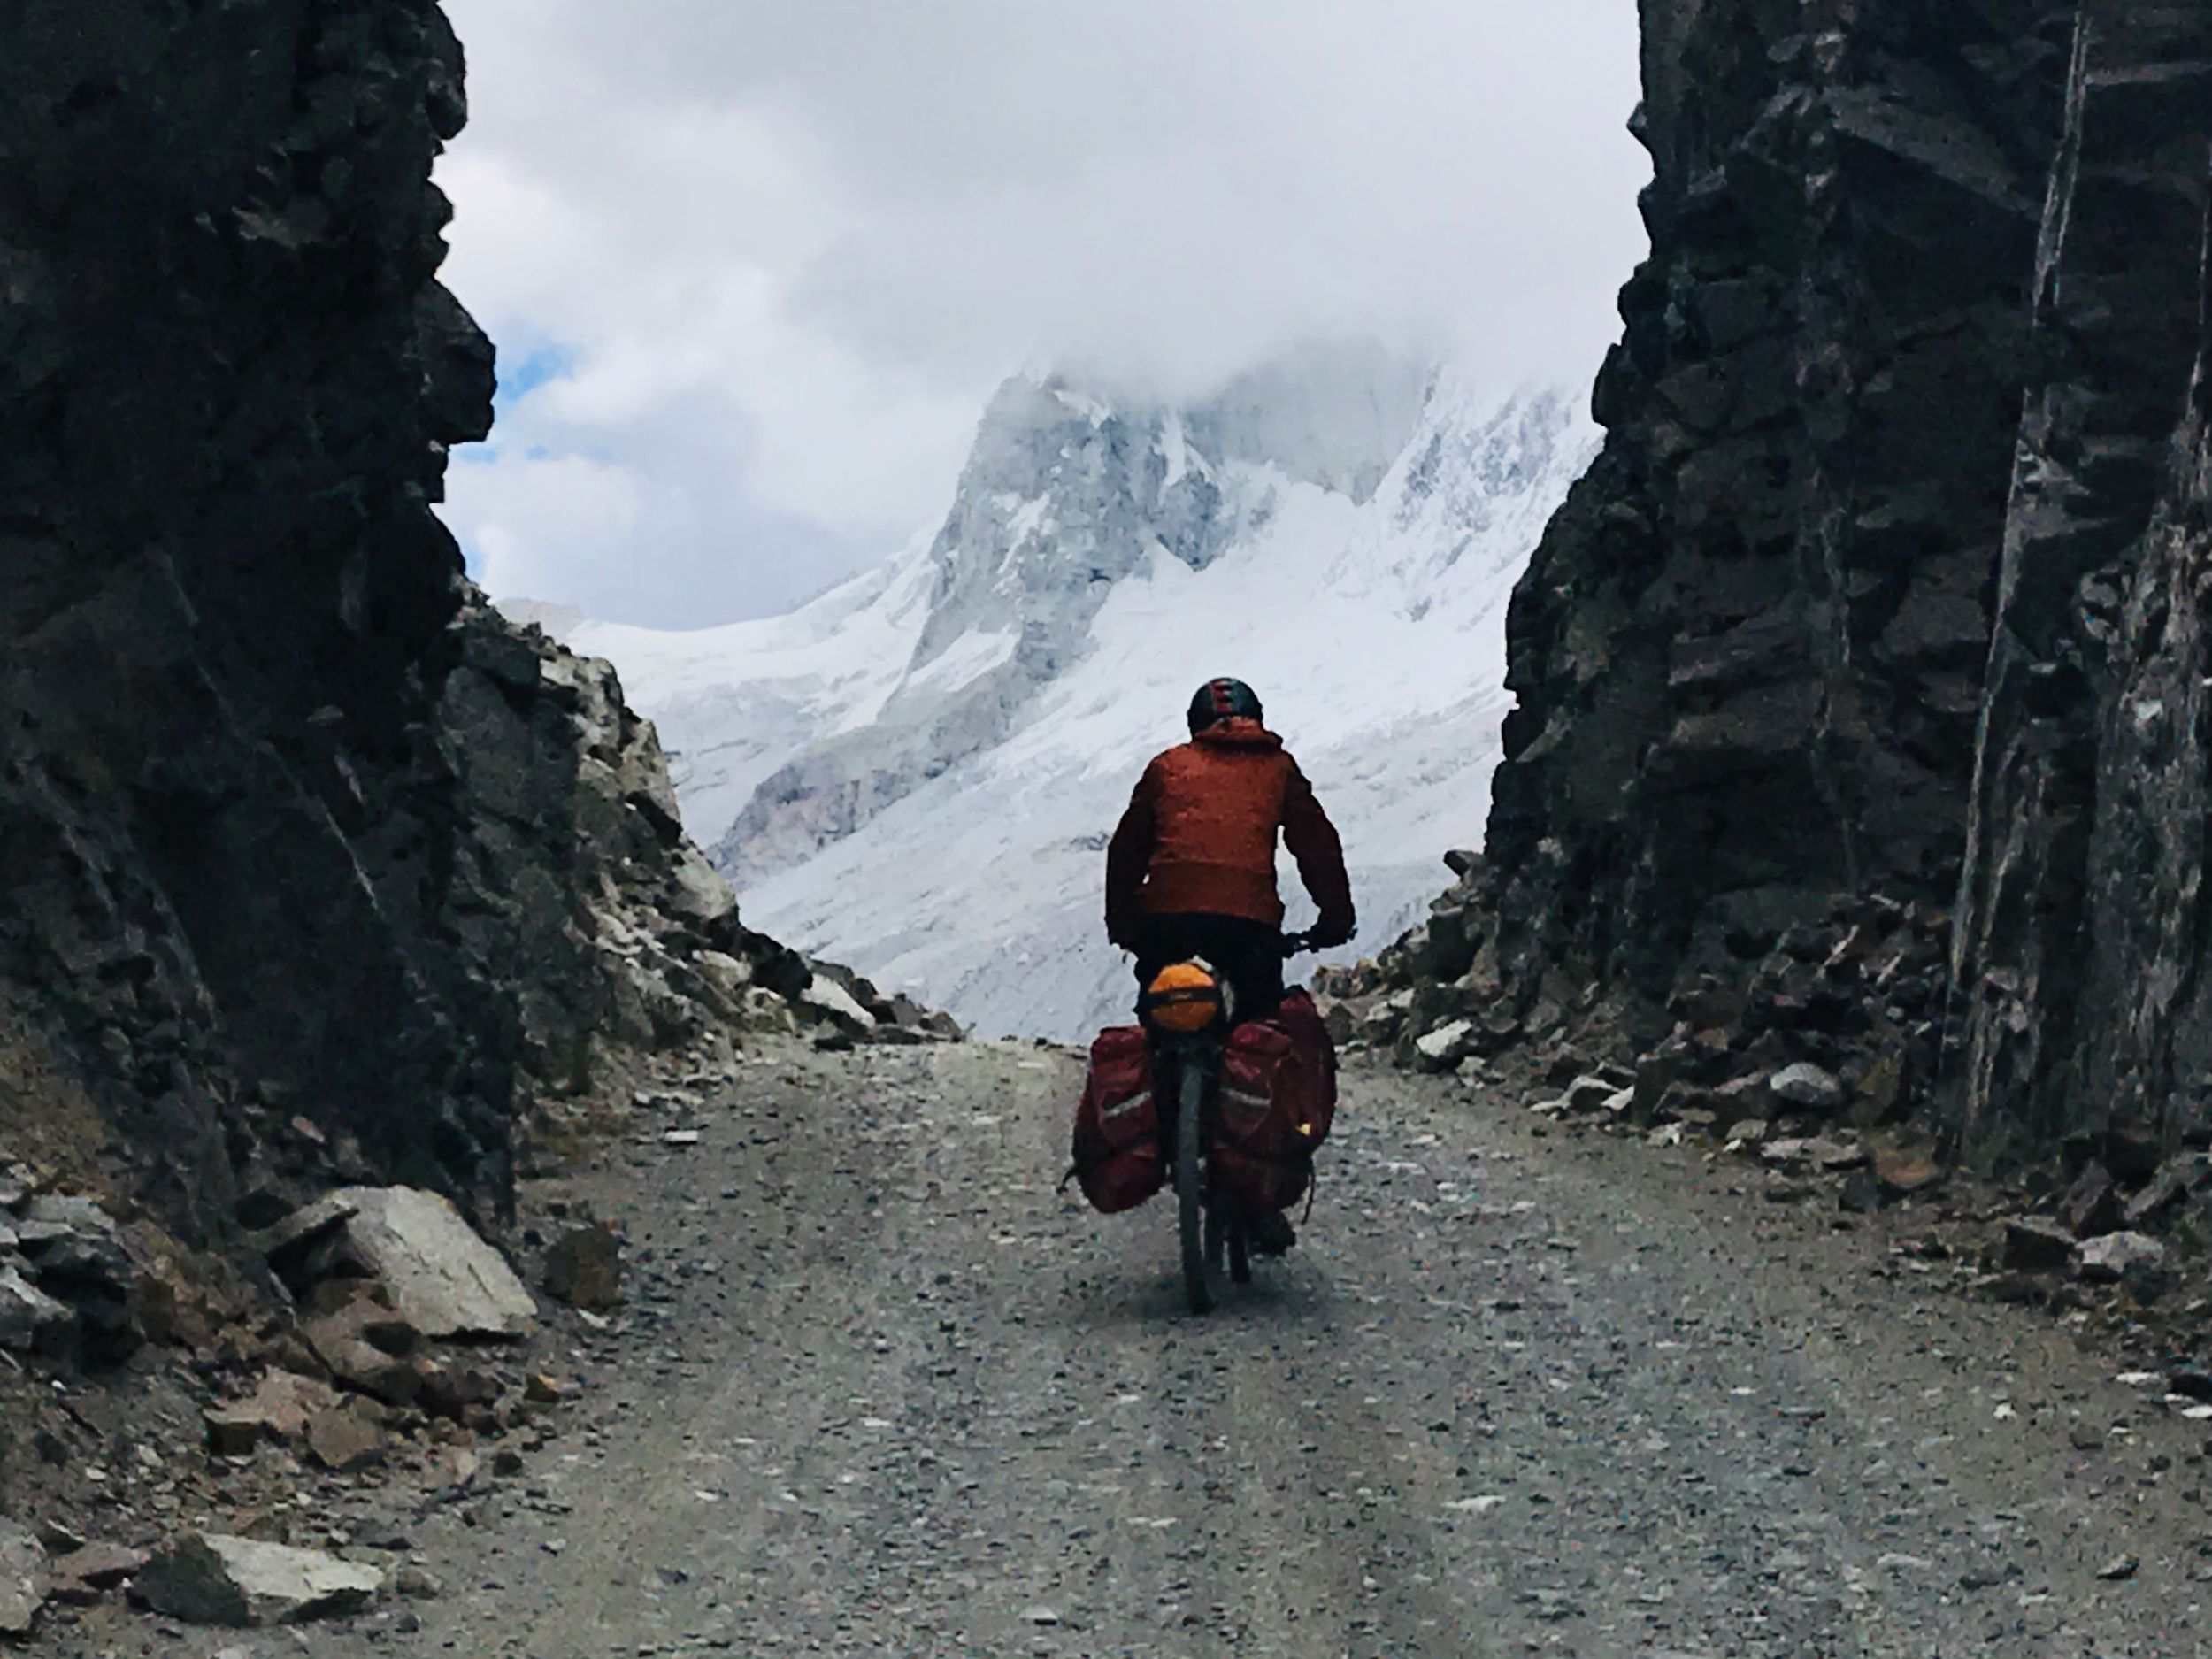 A person rides a loaded bike through a narrow passage between cliffs. Glacier in background.